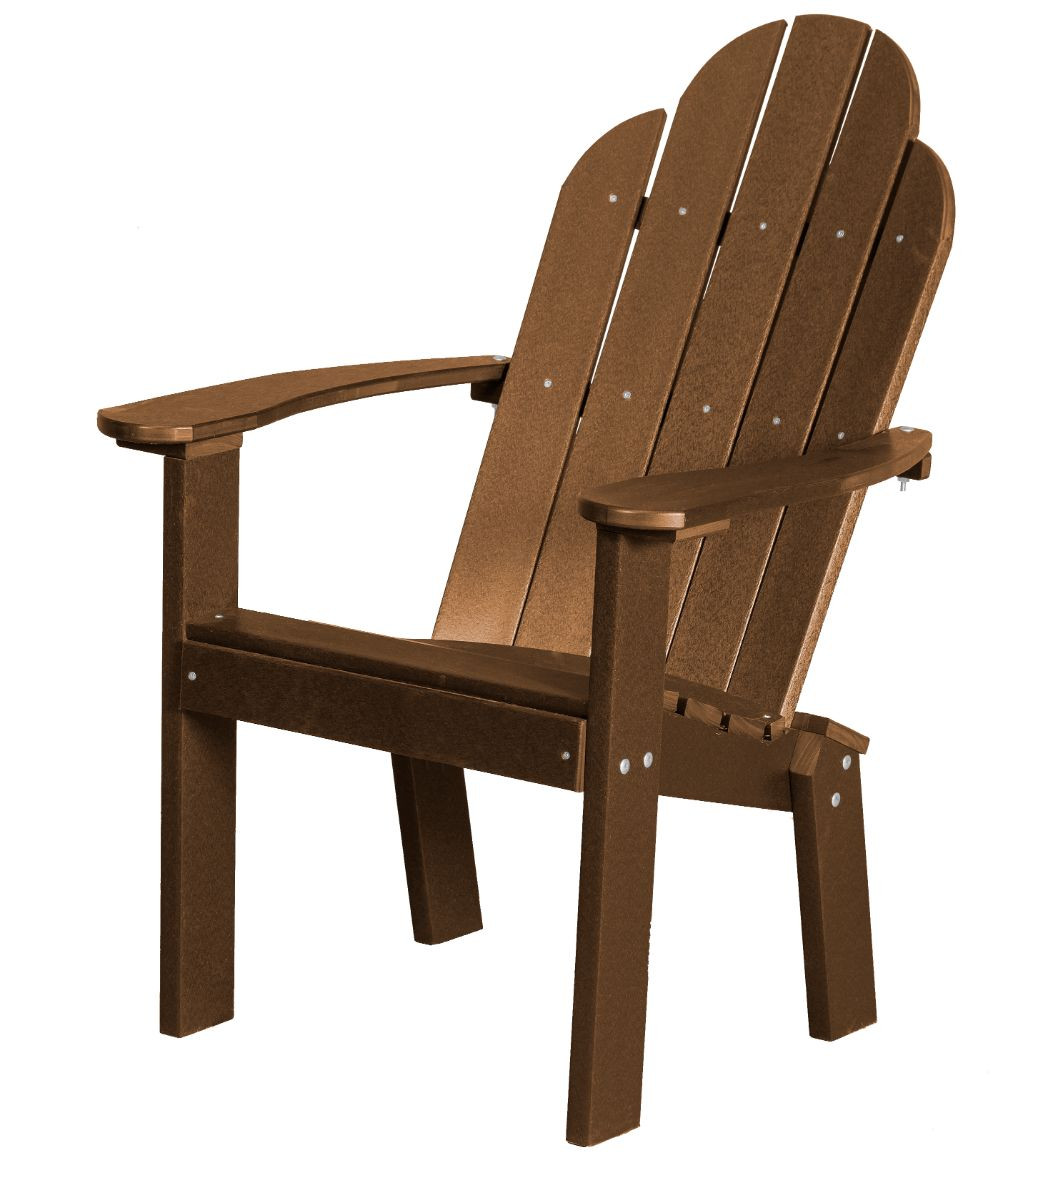 Tudor Brown Odessa Outdoor Dining Chair